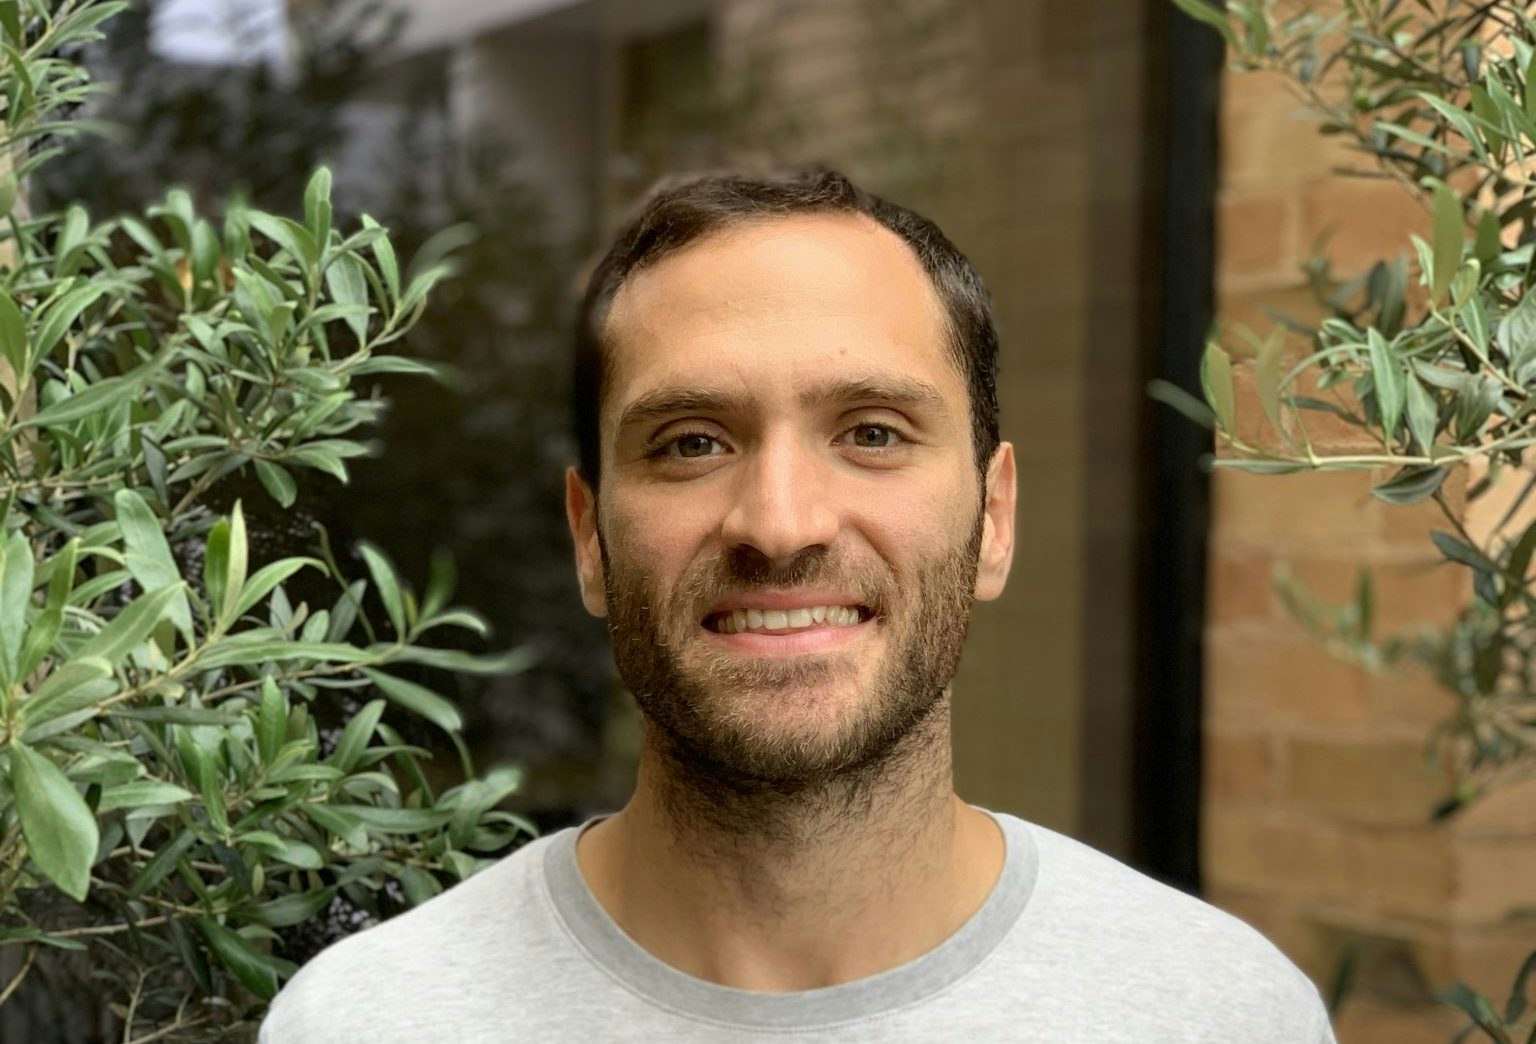 Tanel Ozdemir, a life sciences investor at AlbionVC